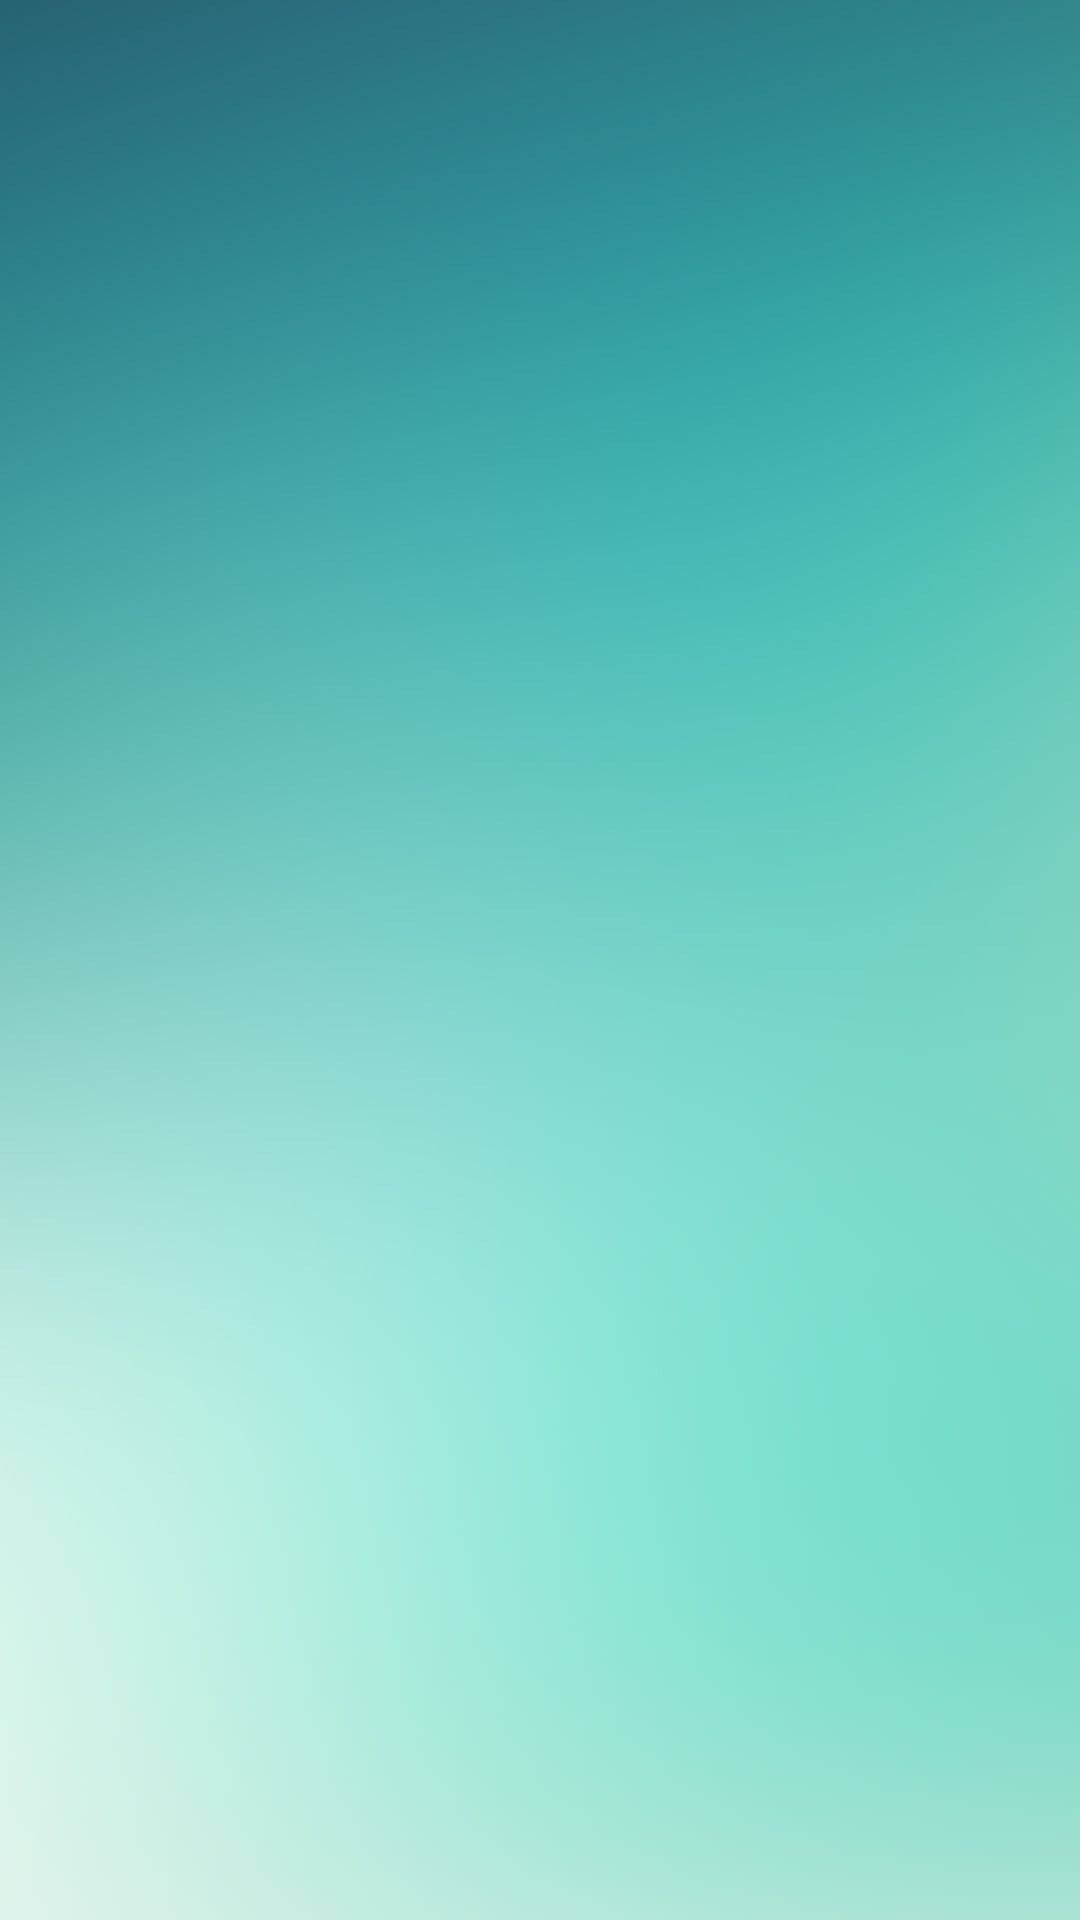 Download Get the Latest and Trendiest Turquoise iPhone Wallpaper   Wallpaperscom